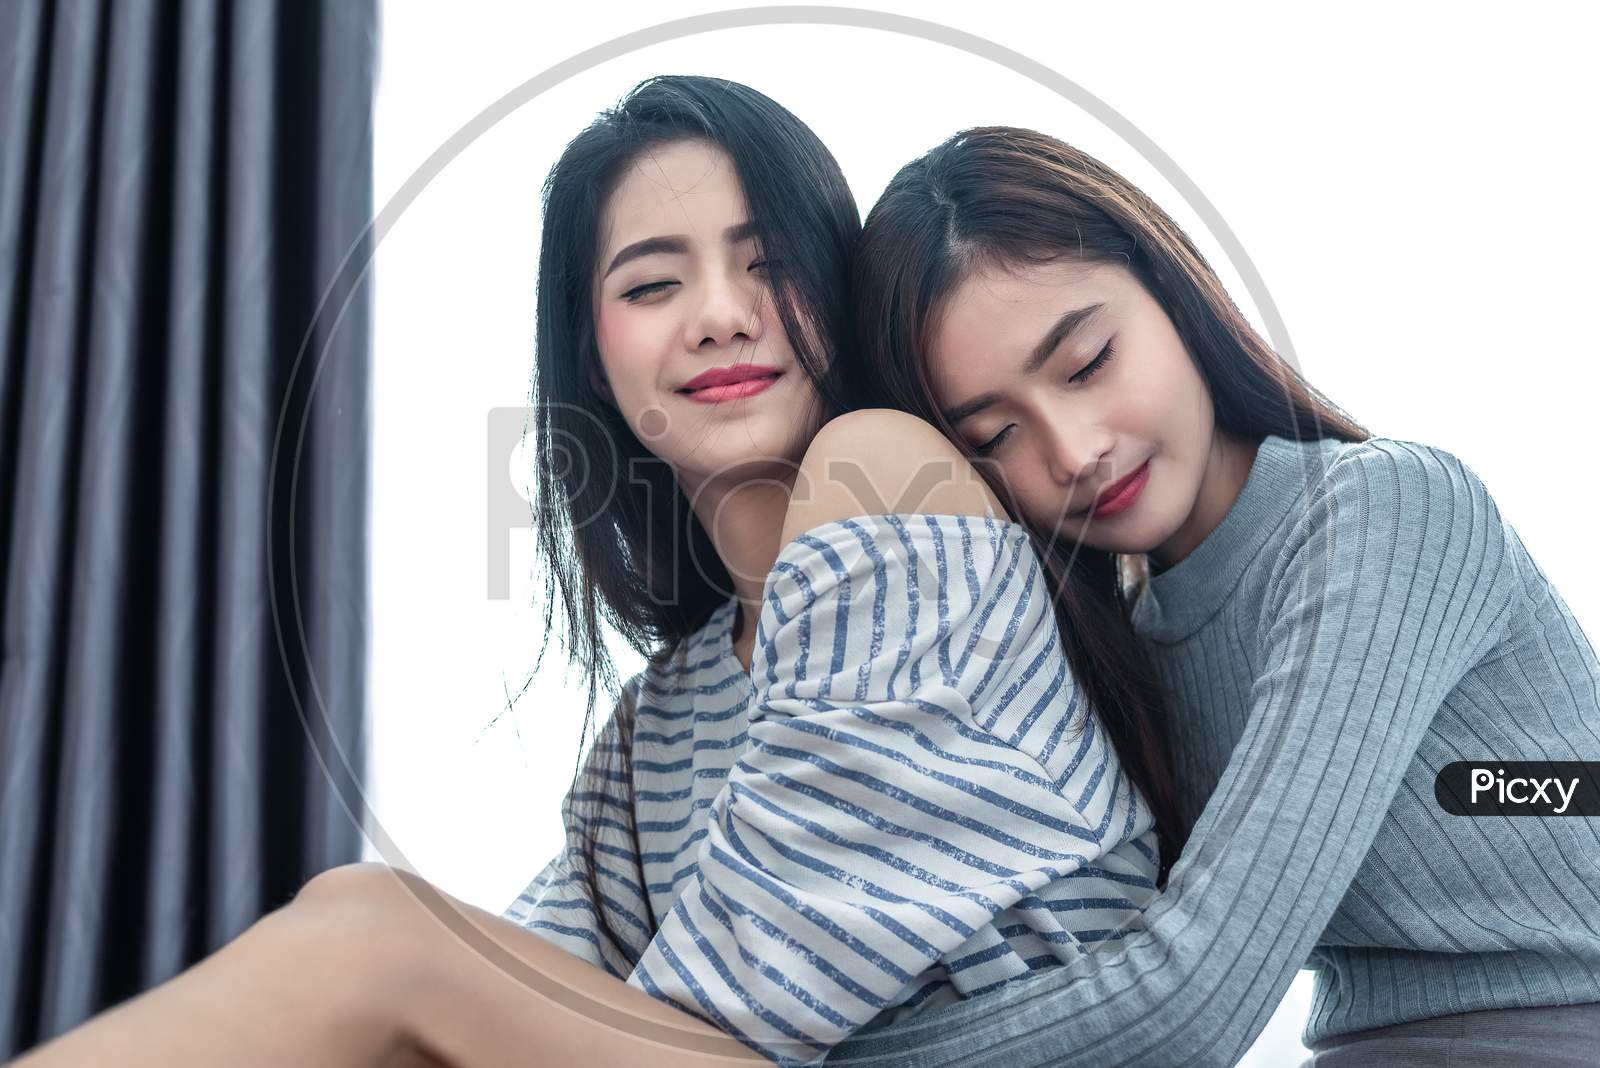 Two Asian Lesbian Women Hug Together In Bedroom. Couple People And Beauty Concept. Happy Lifestyle And Home Sweet Home Theme. Cushion Pillow Element And Window Curtain Background. Love Scene Of Lovers